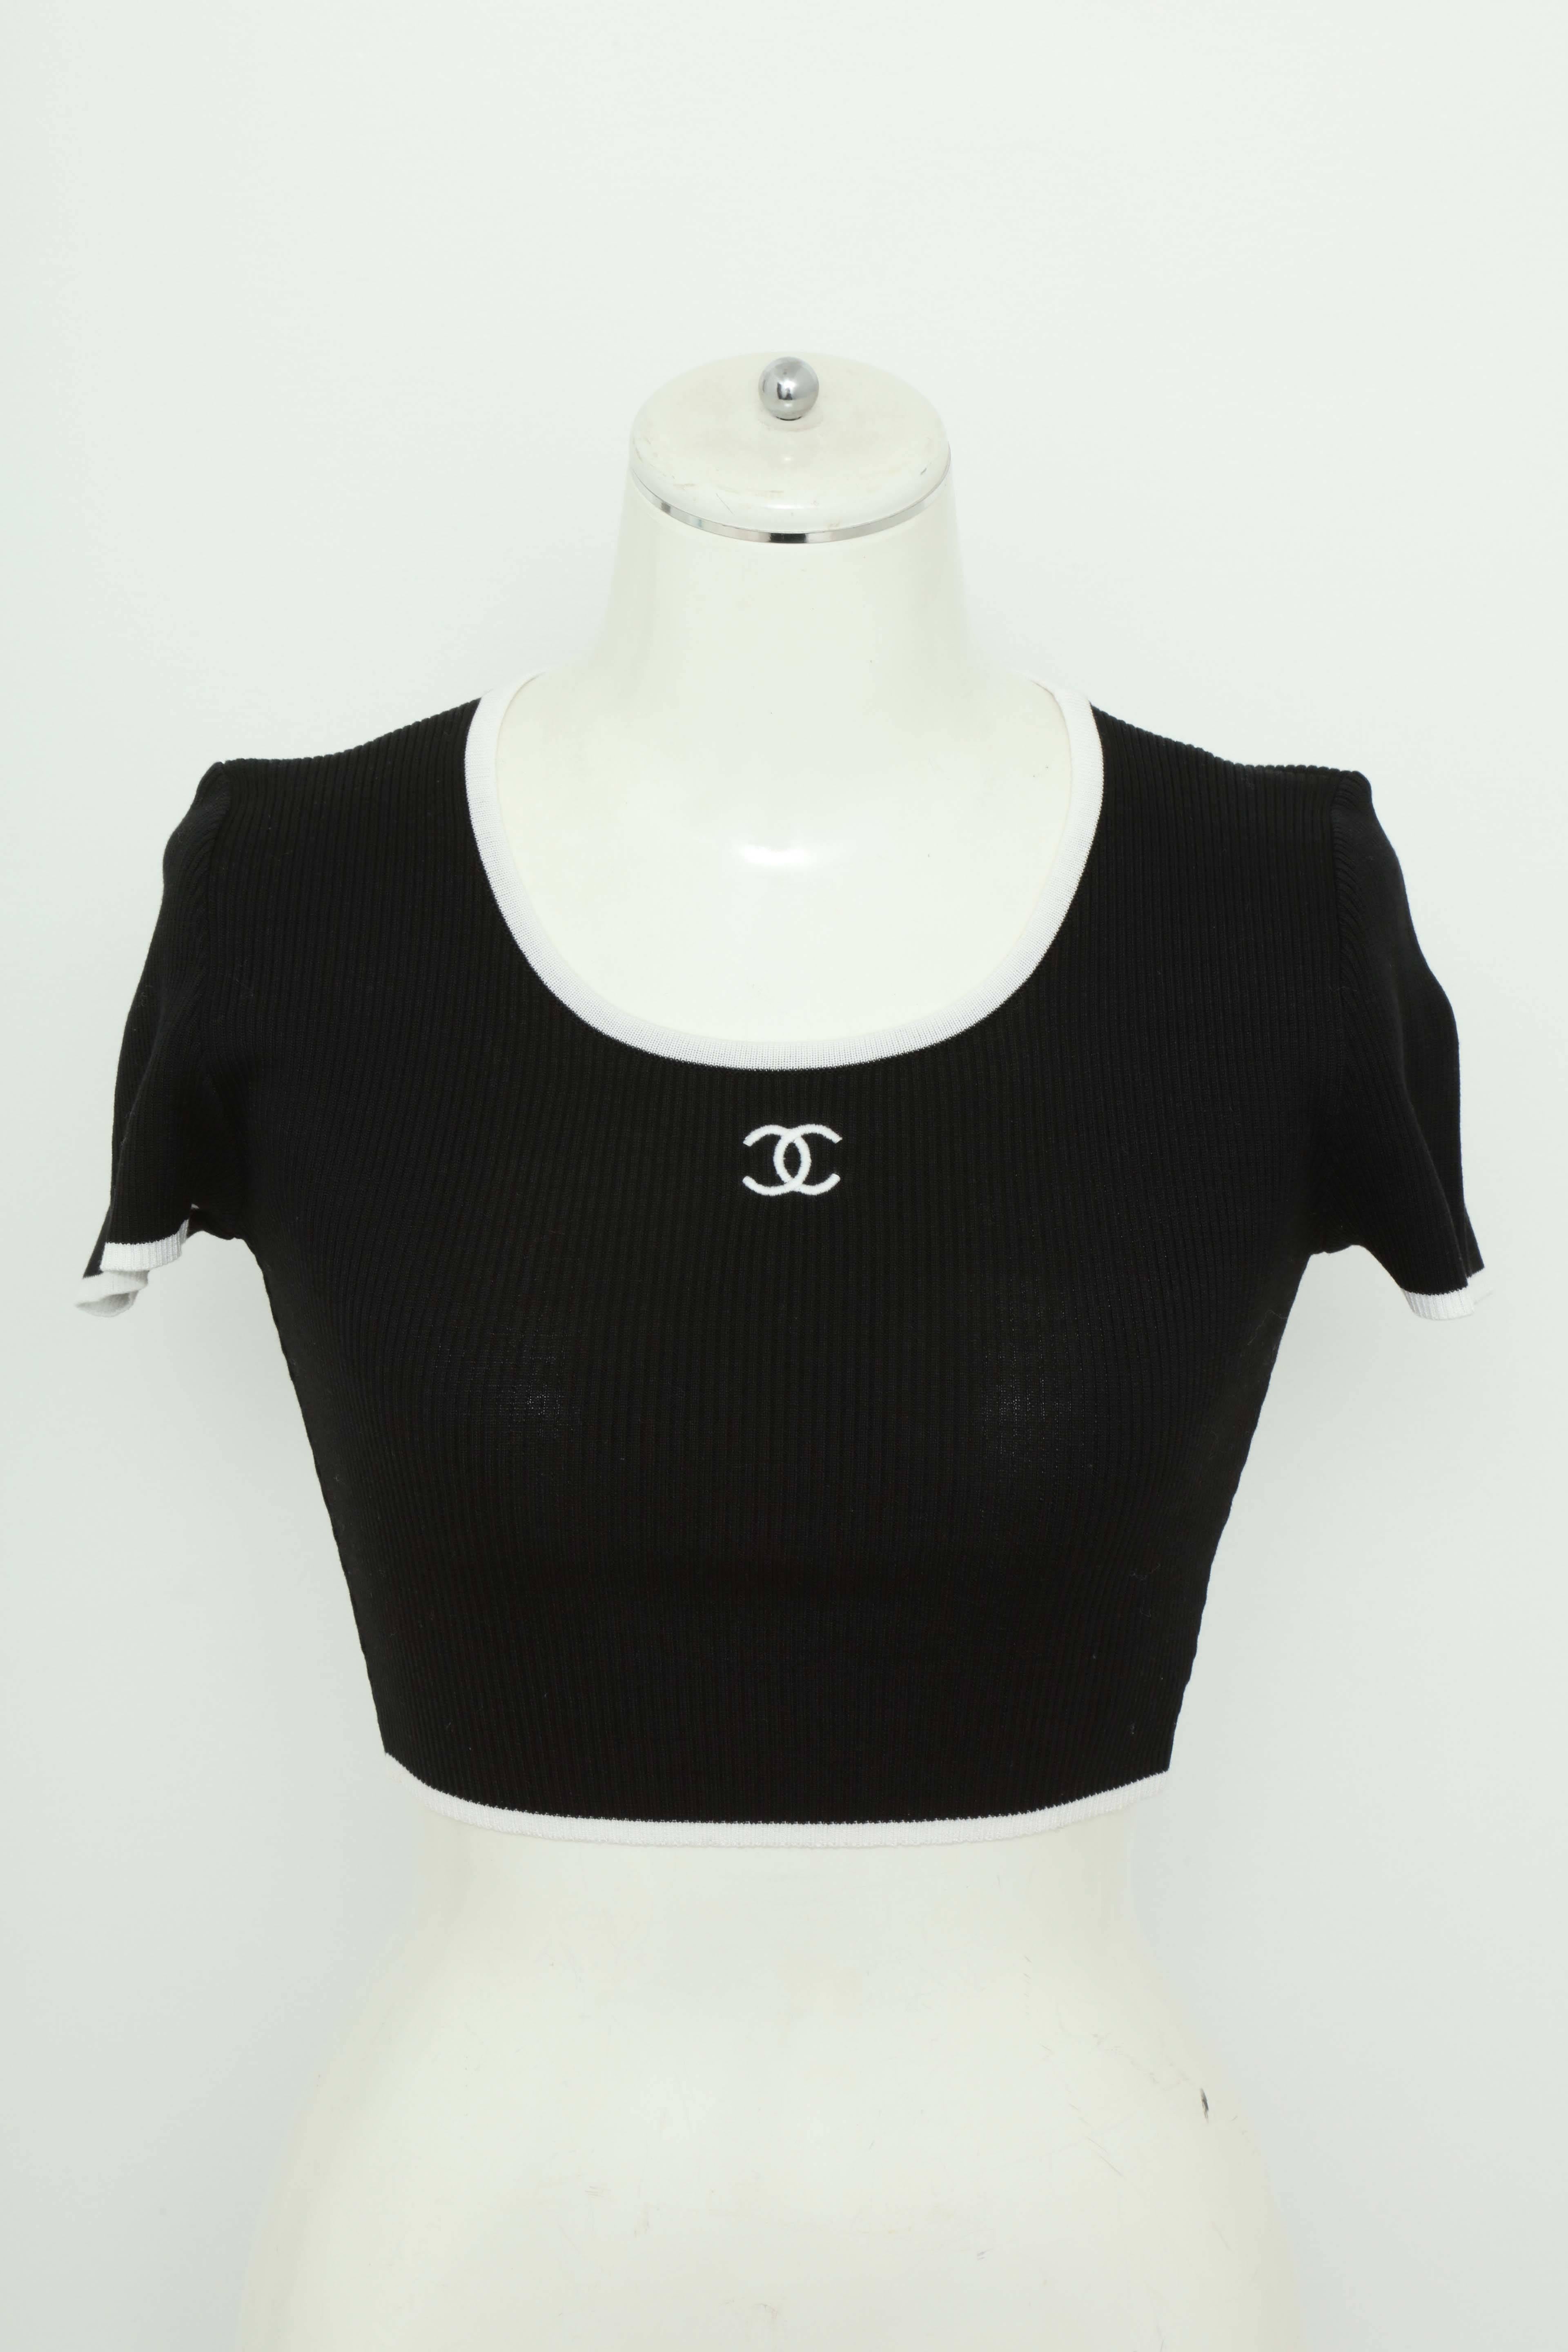 Very rare vintage Chanel black cropped twin knit with iconic CC buttons. French size 38.